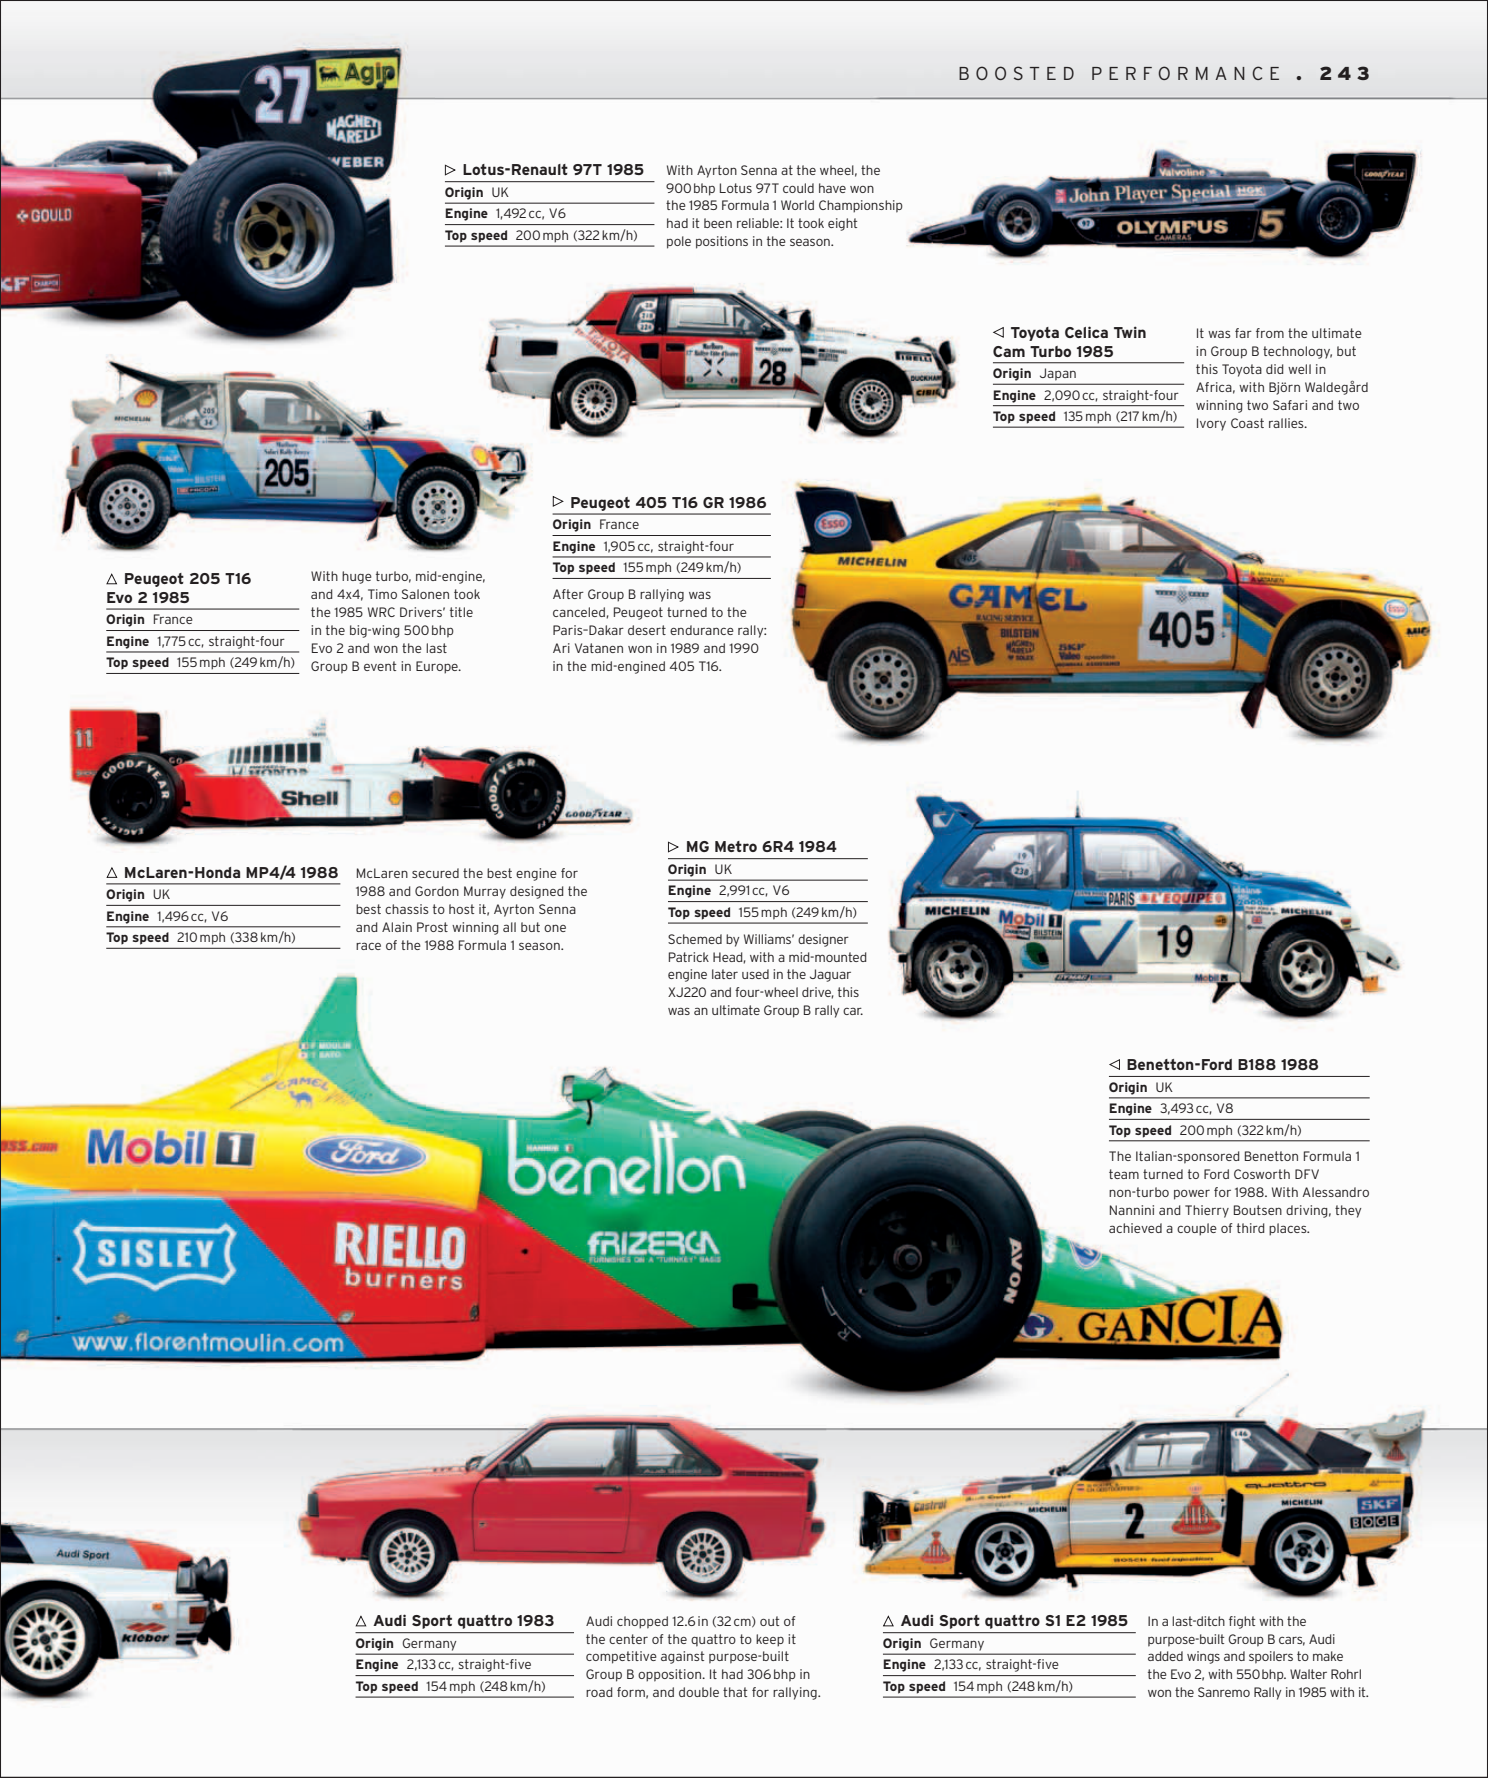 Car%20-%20The%20Definitive%20Visual%20History%20of%20the%20Automobile_245.png